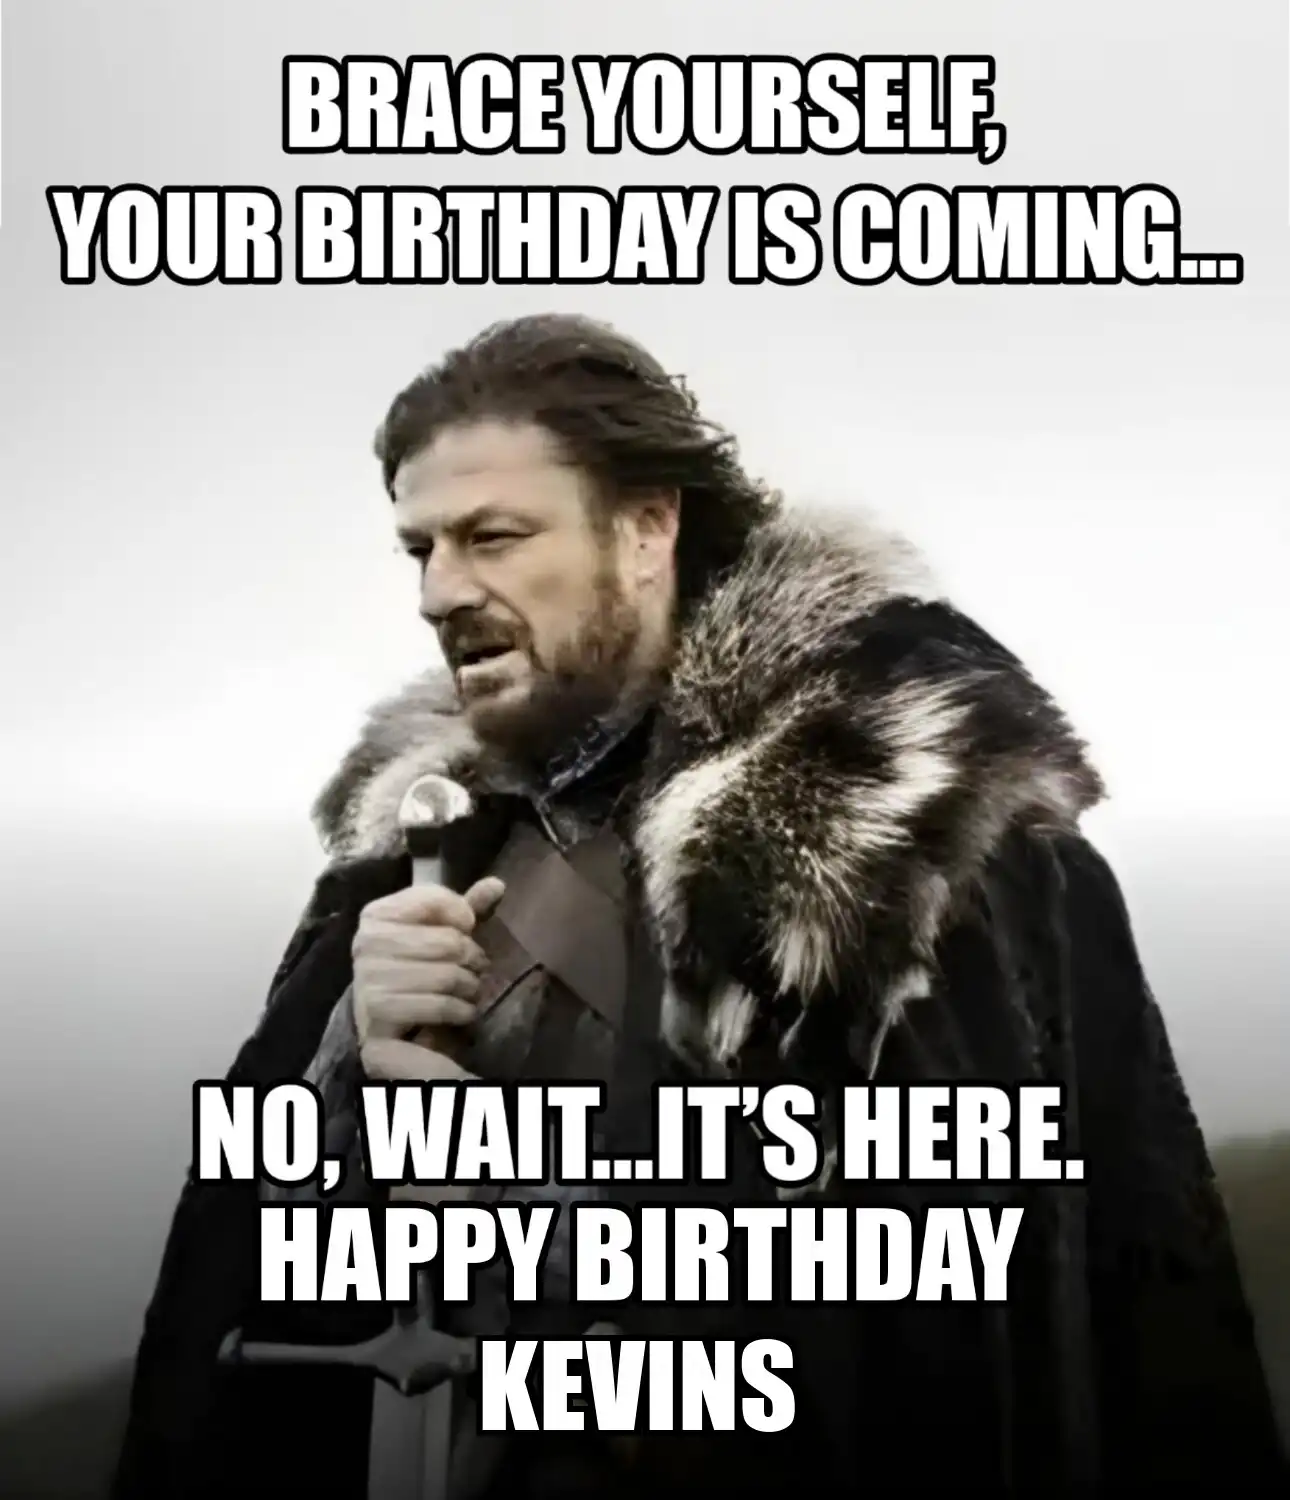 Happy Birthday Kevins Brace Yourself Your Birthday Is Coming Meme